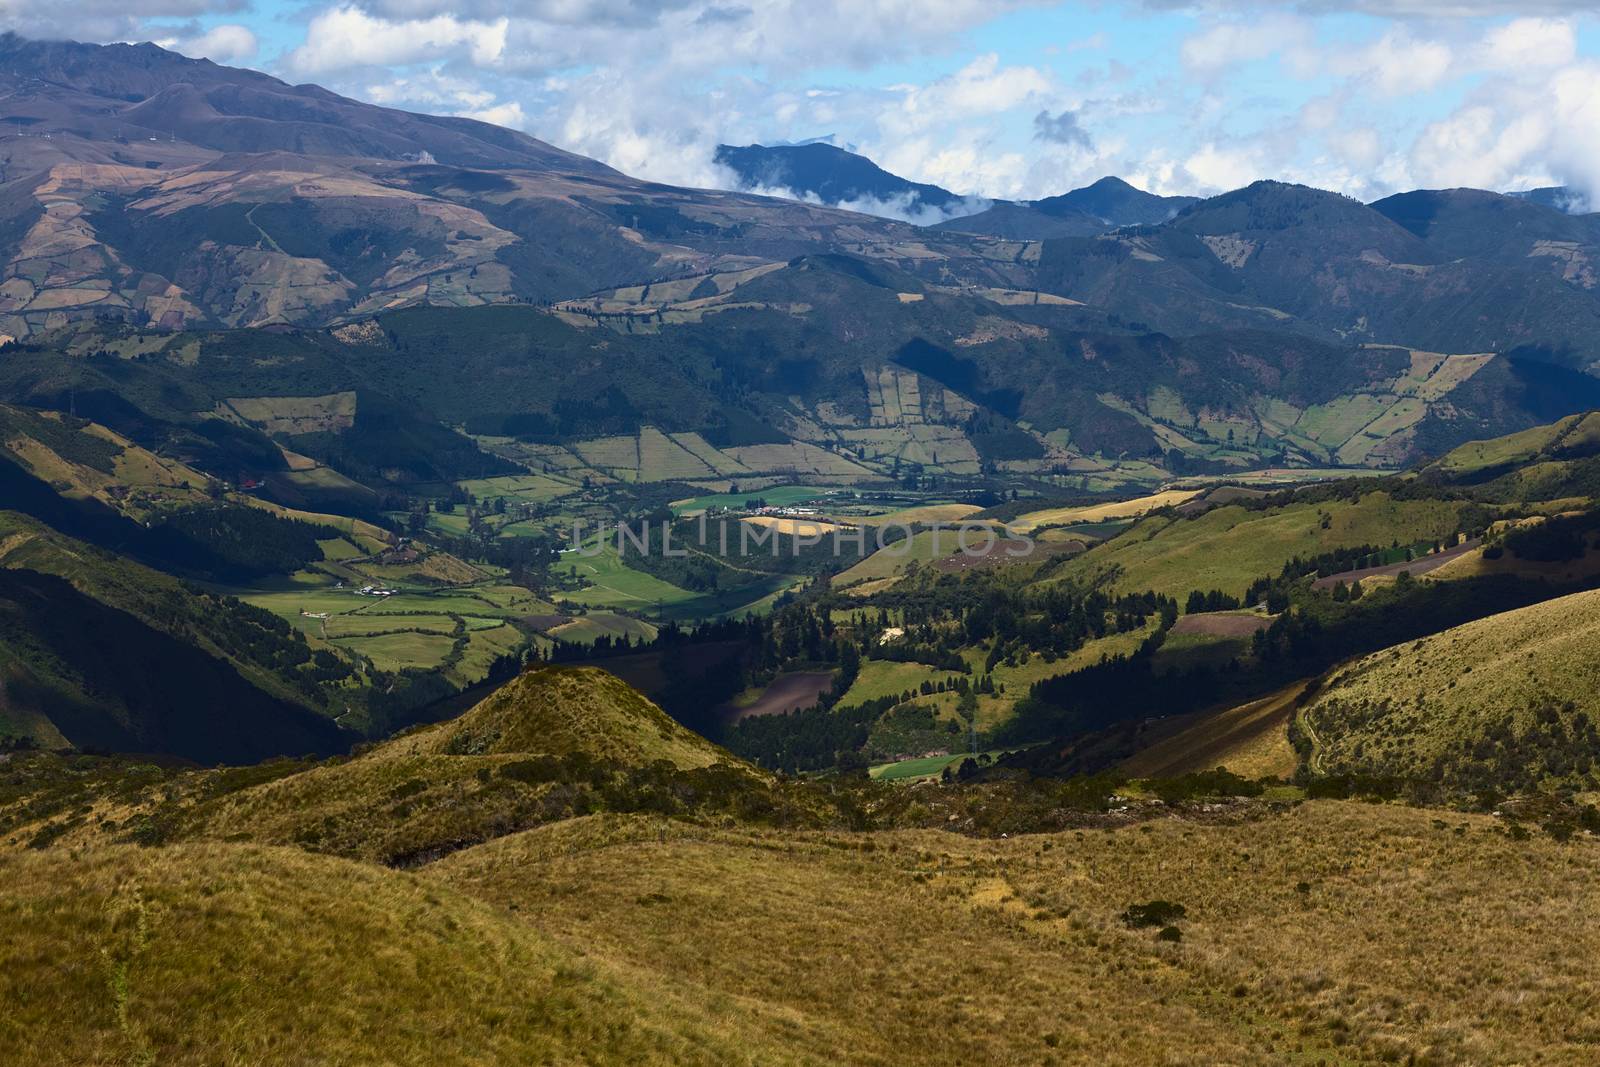 View to the South from the Cruz Loma lookout close to the TeleferiQo cable car station on the Pichincha mountain in Quito, Ecuador